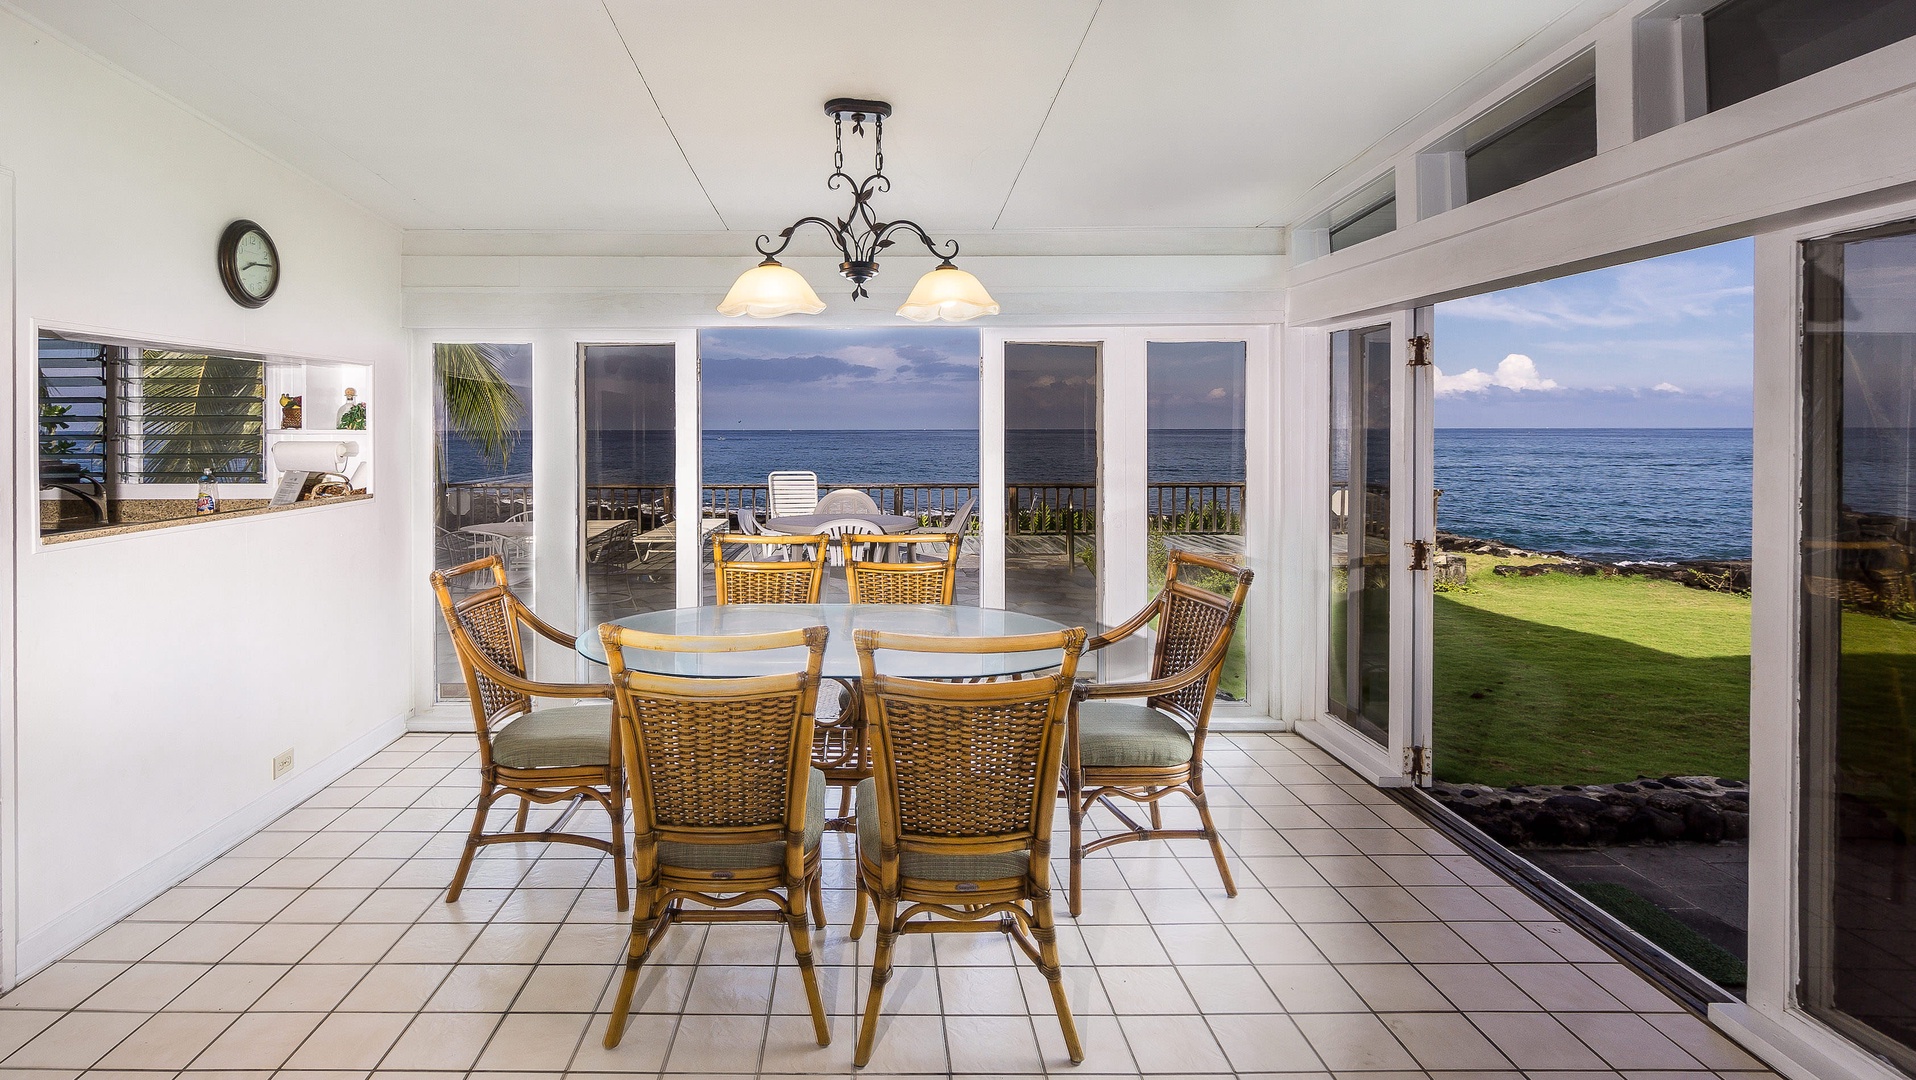 Dining table for 6 w/ ocean views